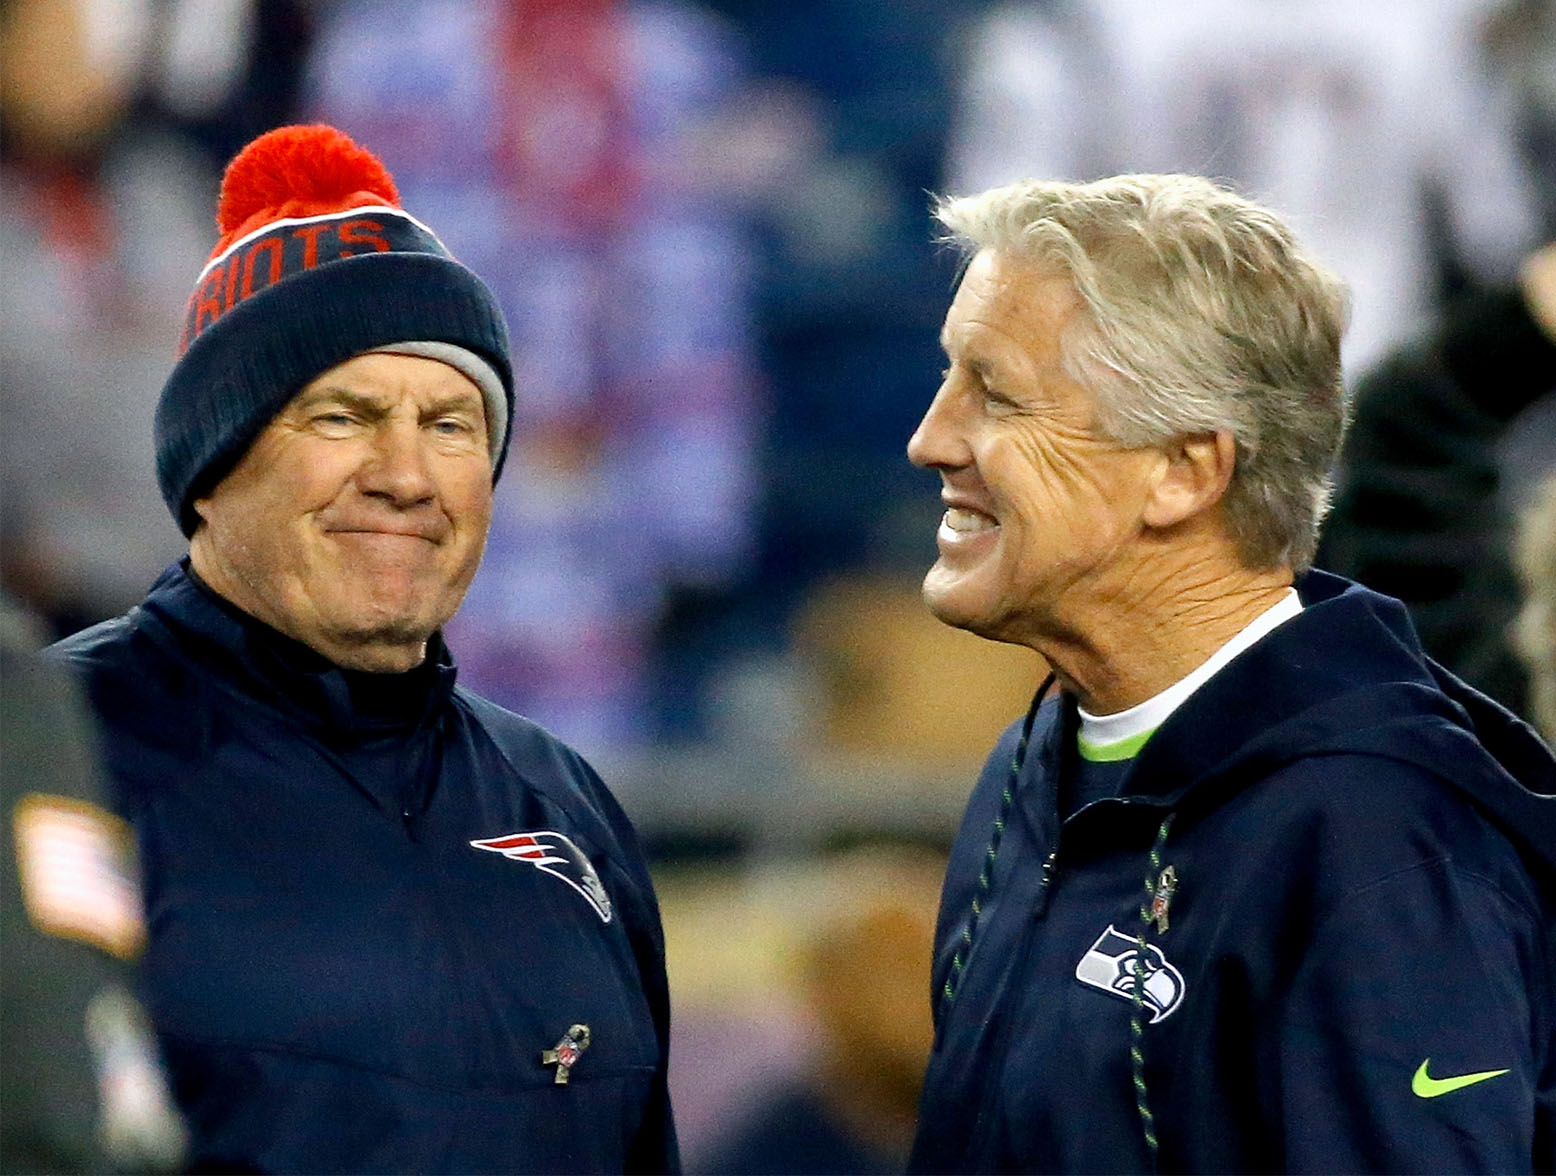 FOXBORO, MA - NOVEMBER 13: Head coach Bill Belichick of the New England Patriots talks with Head coach Pete Carroll of the Seattle Seahawks before a game at Gillette Stadium on November 13, 2016 in Foxboro, Massachusetts. (Photo by Jim Rogash/Getty Images)